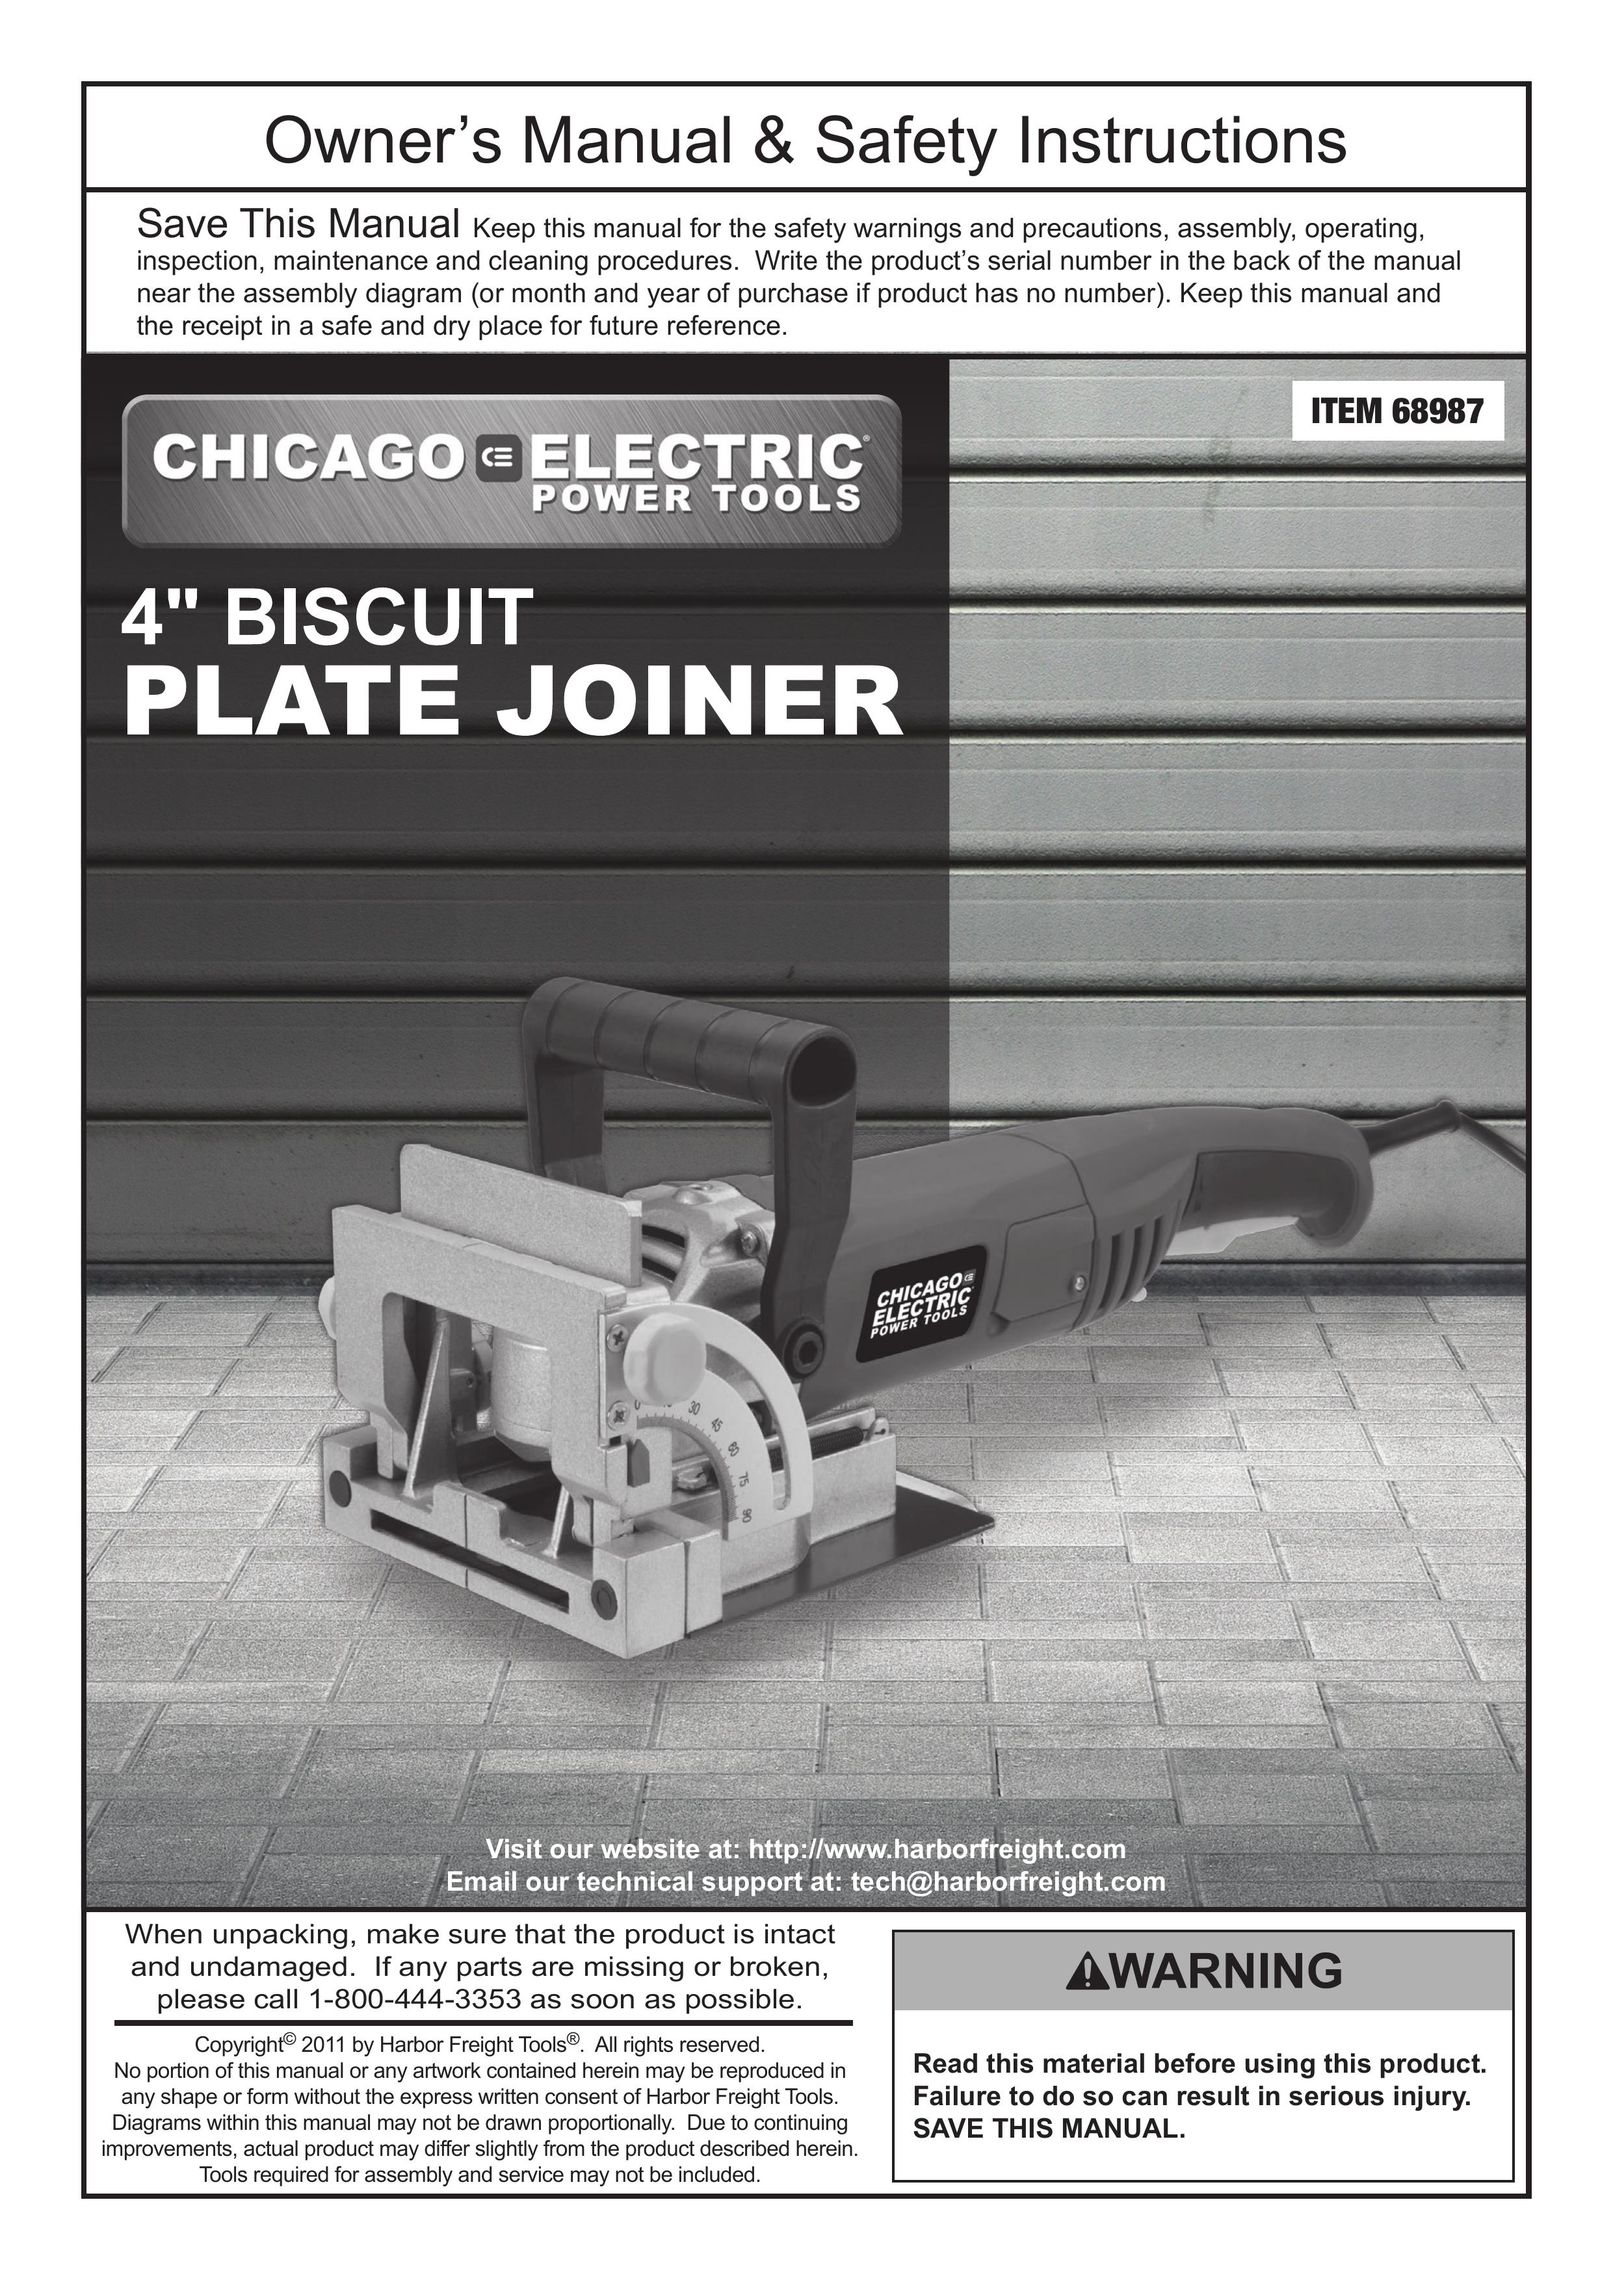 Chicago Electric 68987 Biscuit Joiner User Manual